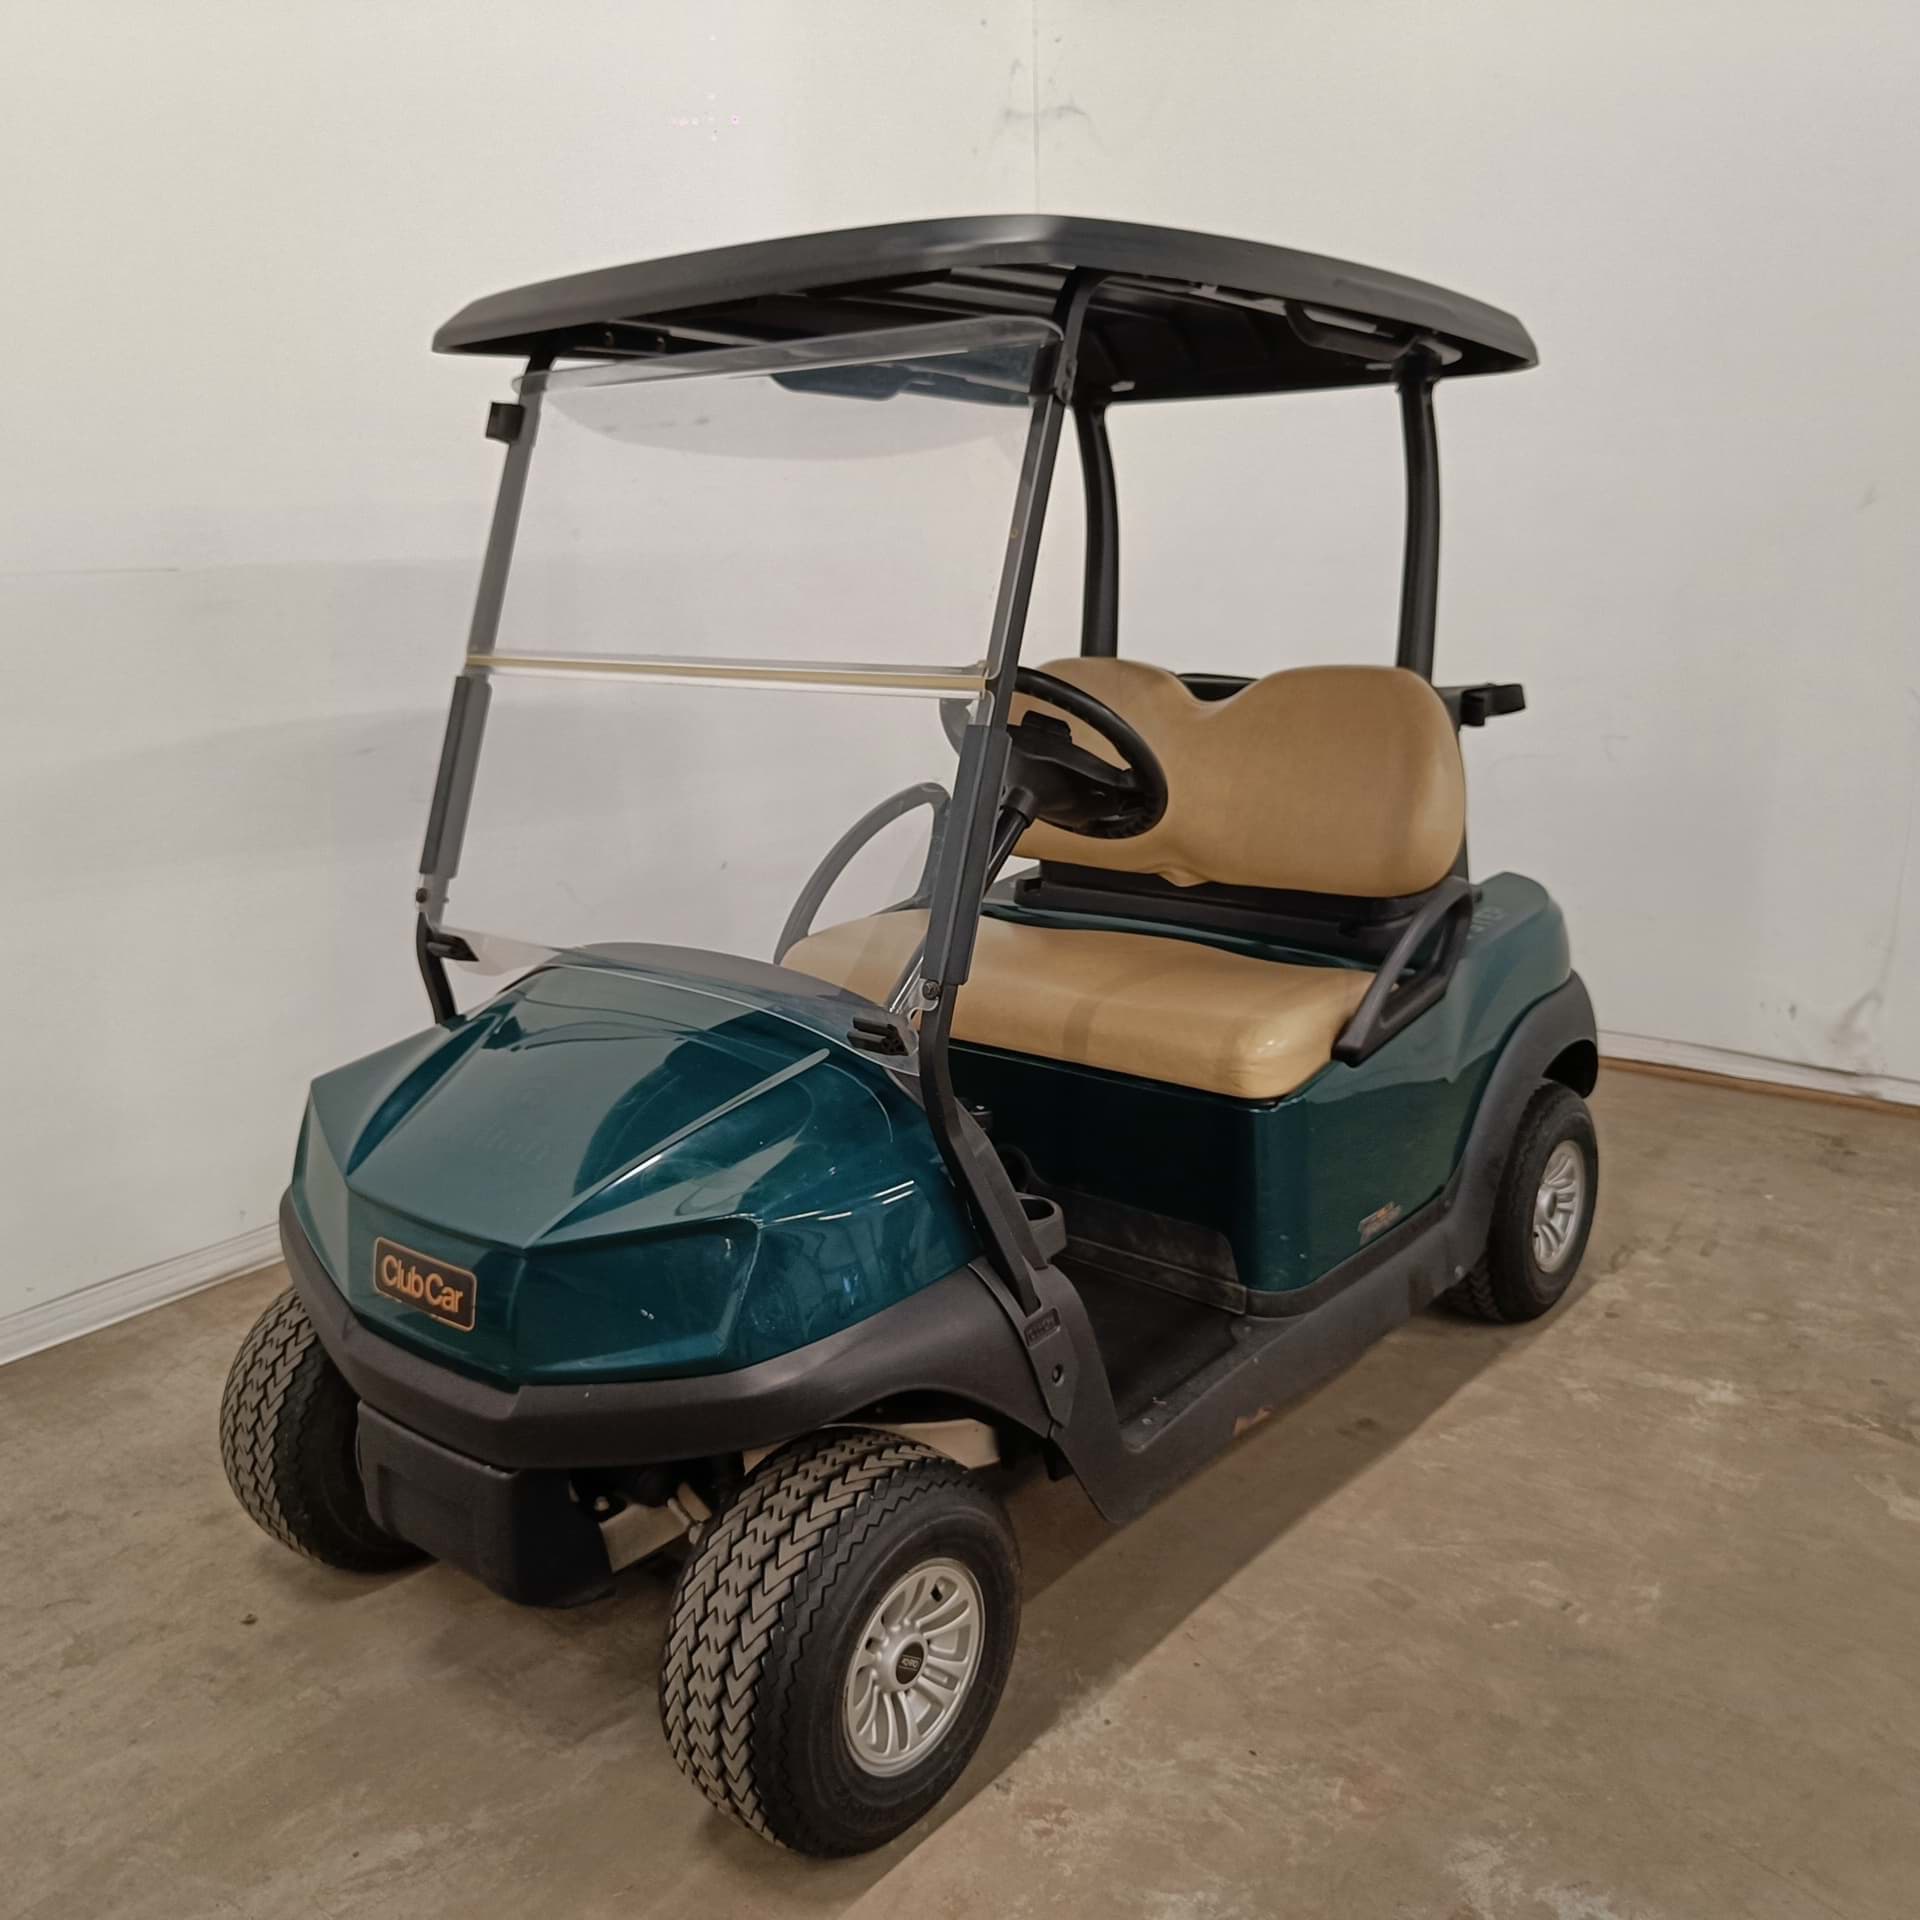 Picture of Trade - 2019 - Electric lithium - Club Car - Tempo - 2 seater - Green